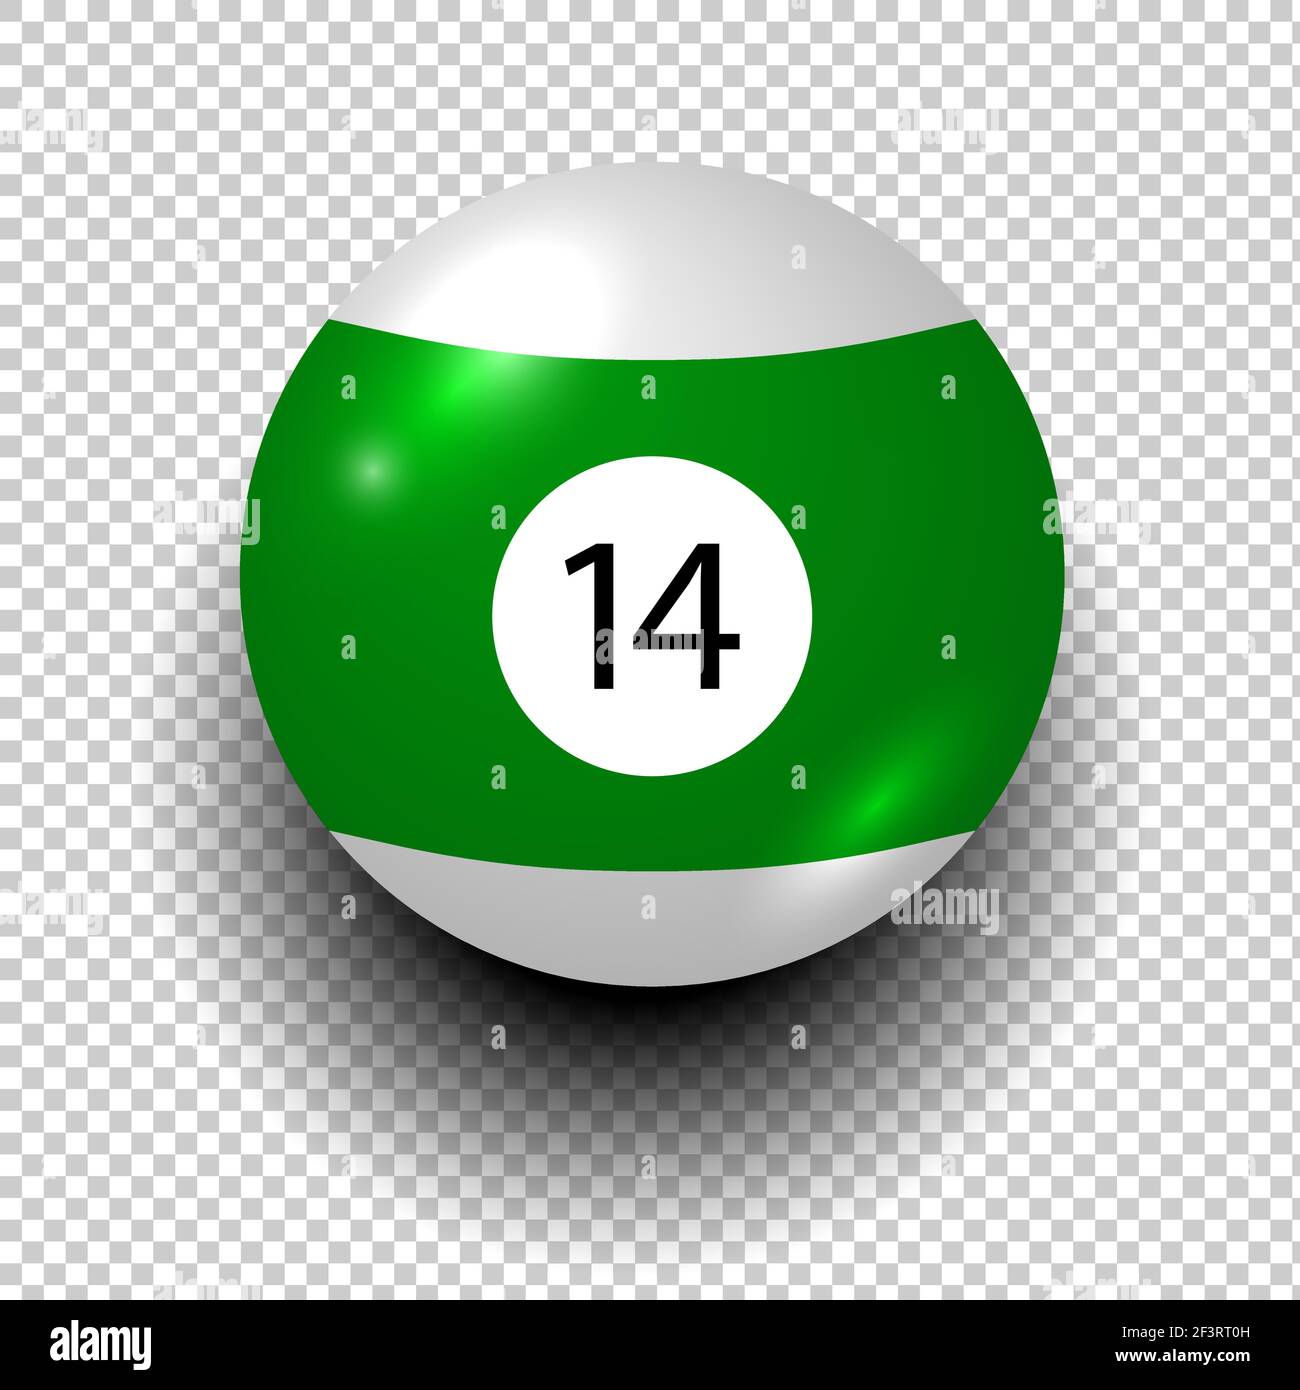 billiard ball number 14. Green and white color. Isolated wind object on transparent background Stock Vector